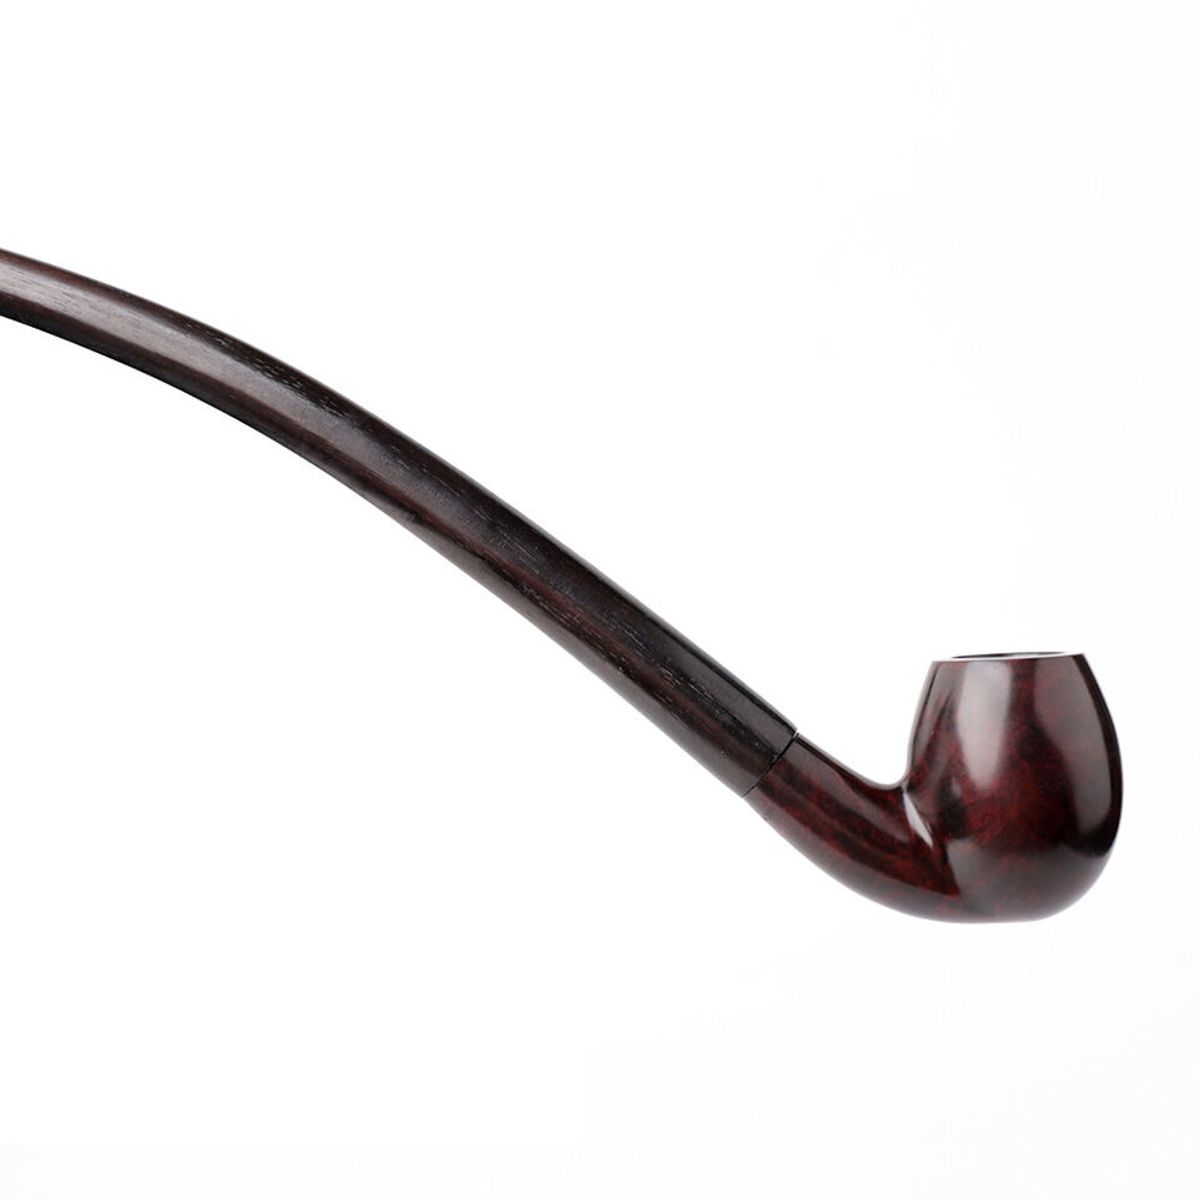 From Middle-earth to Your Hearth: The Smaug Pipe's Journey